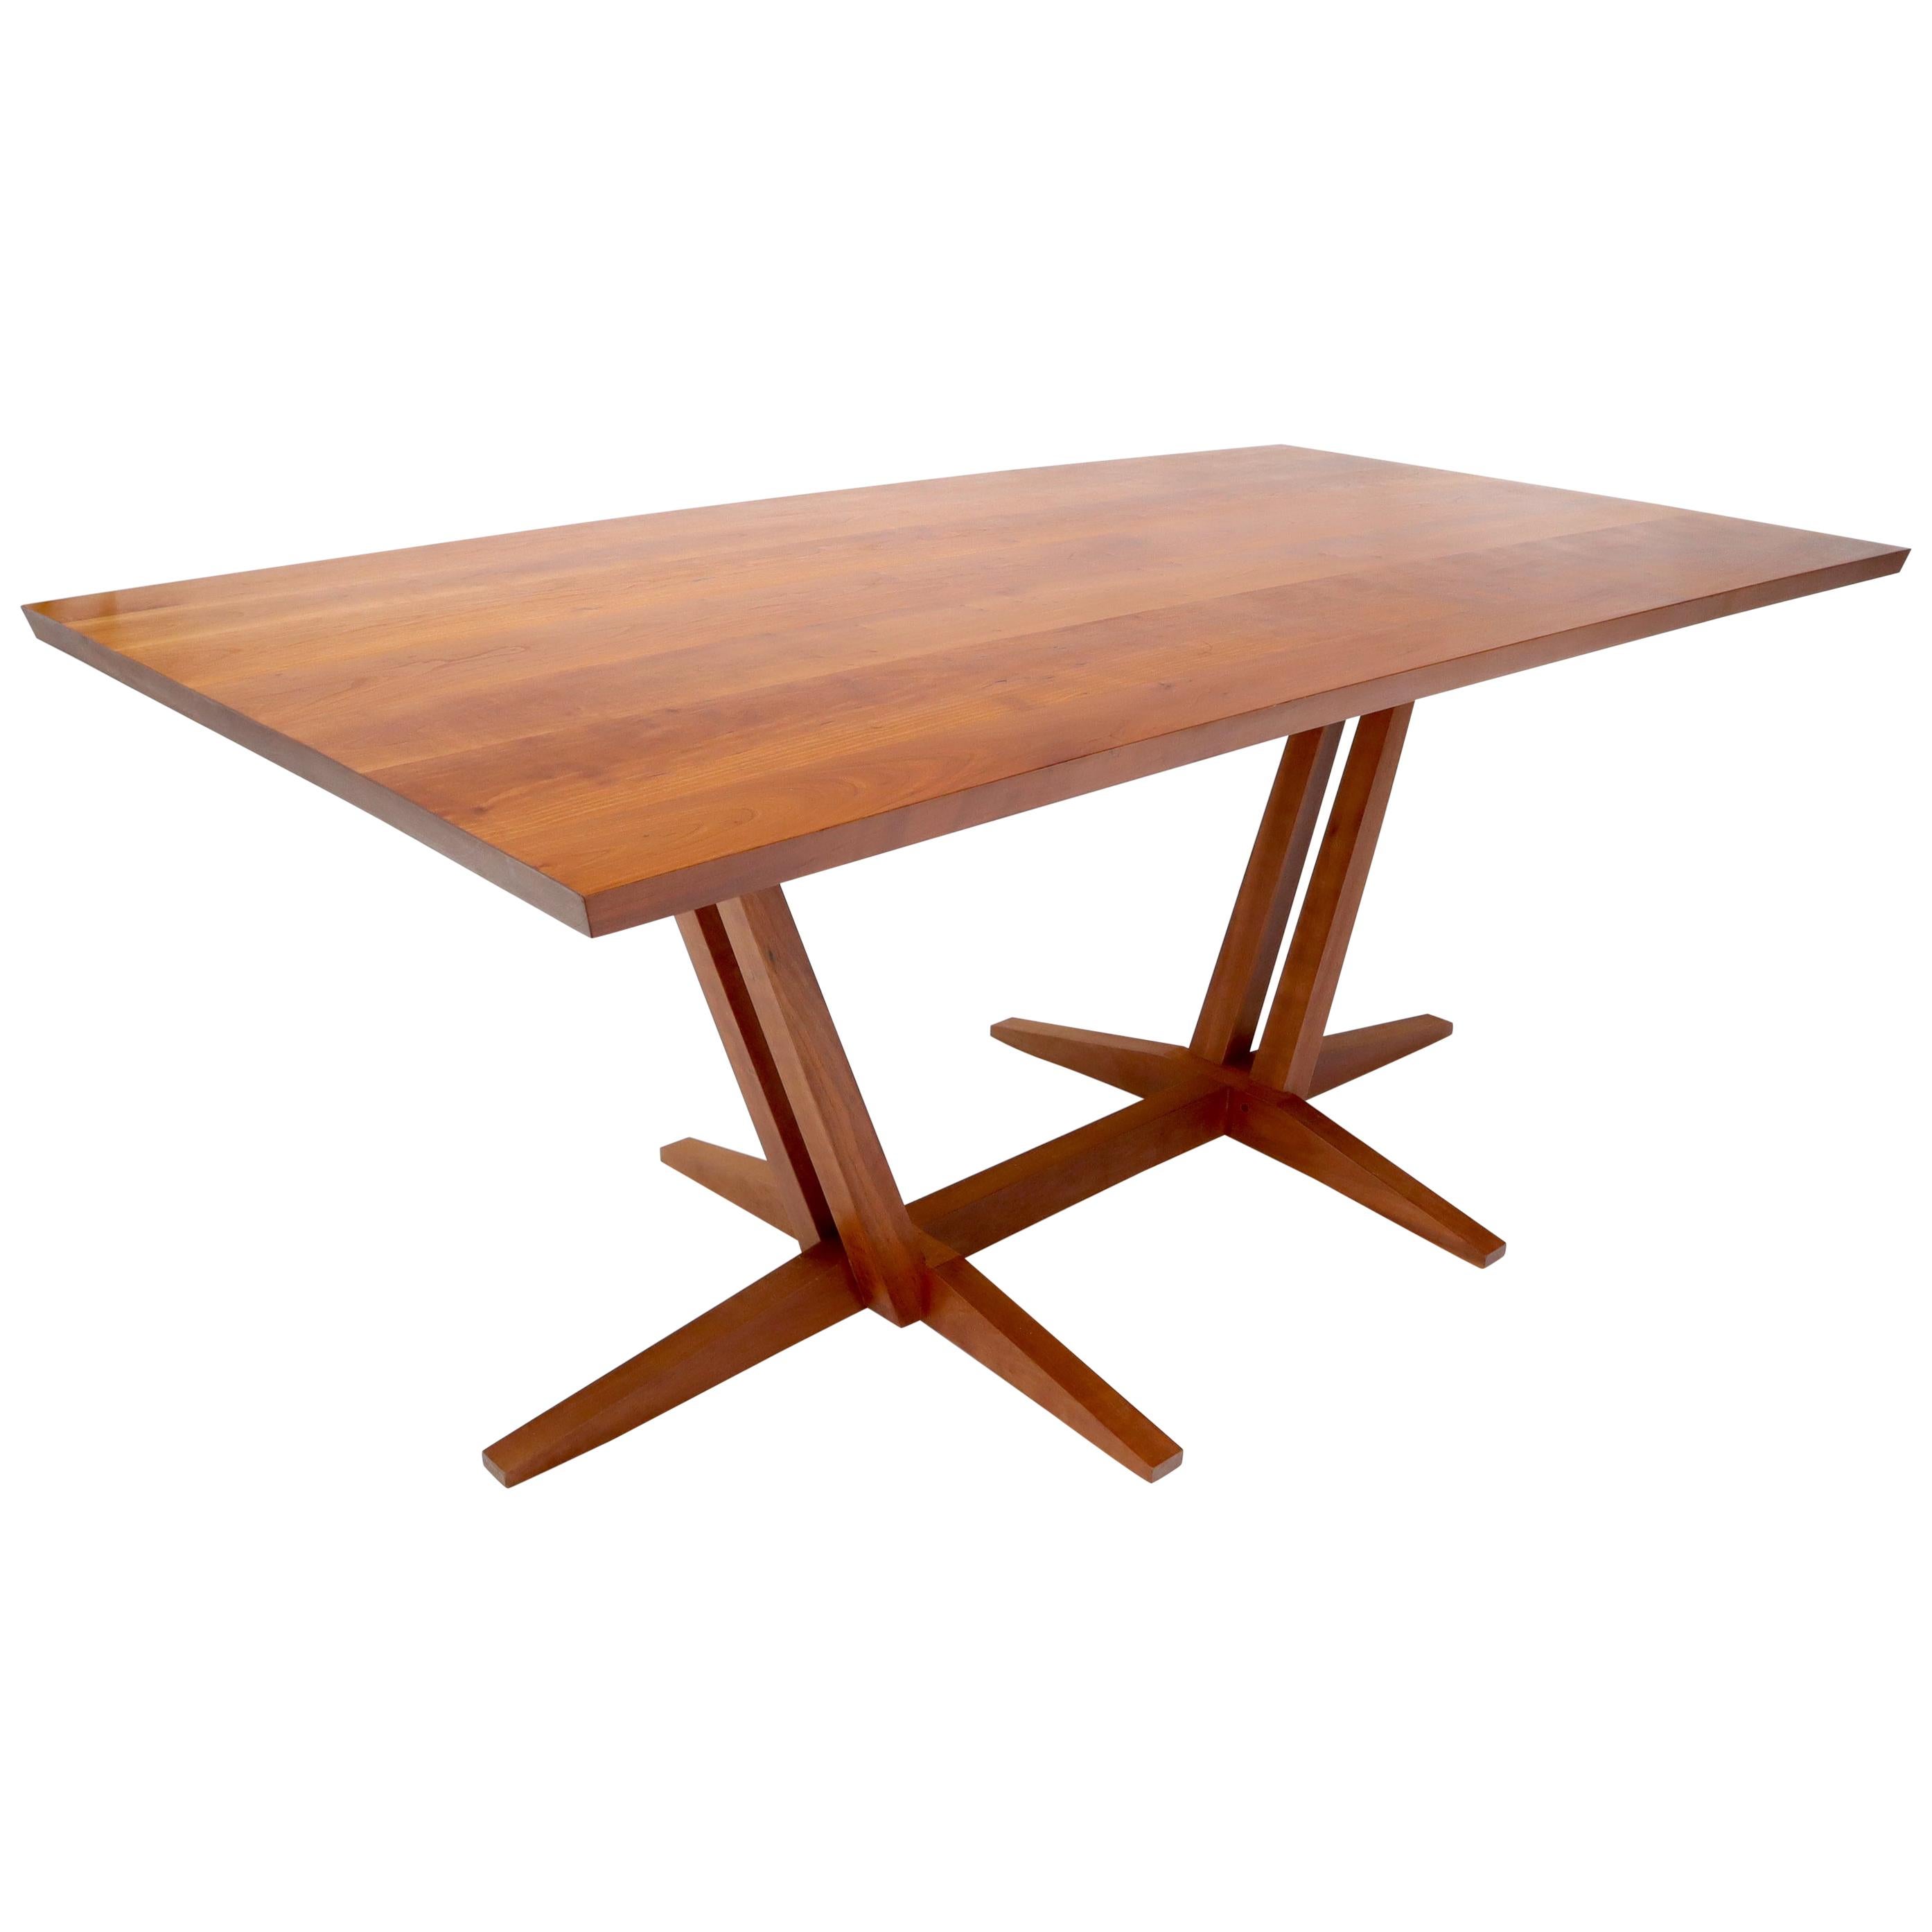 Thomas Moser Trestle Base Studio Made Thick Solid Cherry Top Dining Table